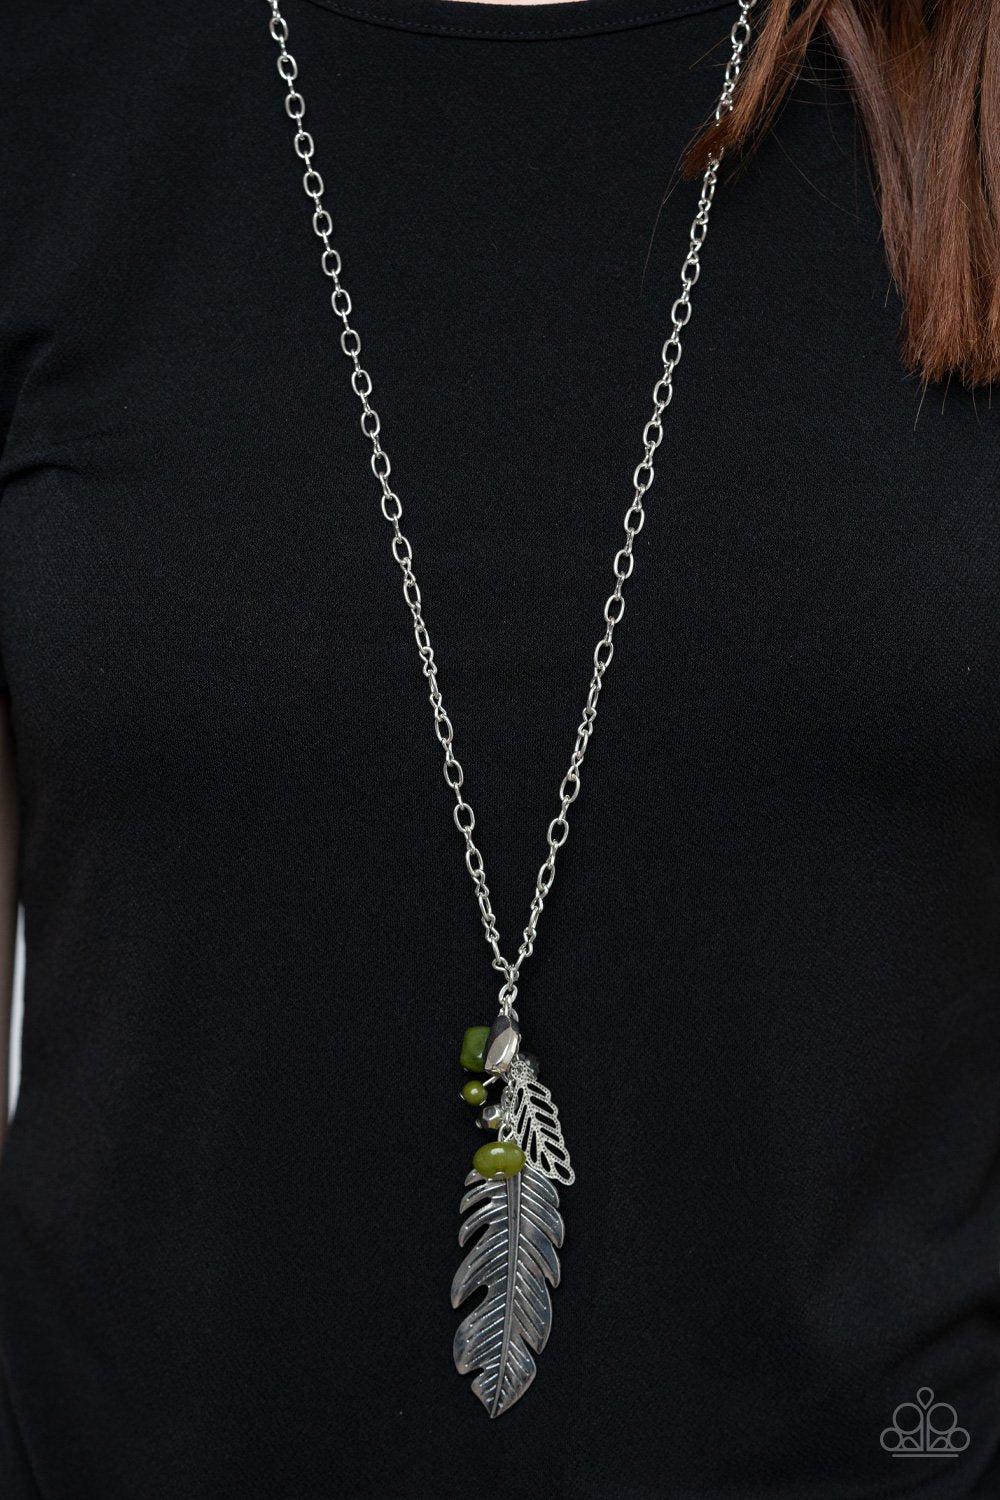 Feather Flair Green and Silver Feather Necklace - Paparazzi Accessories - model -CarasShop.com - $5 Jewelry by Cara Jewels